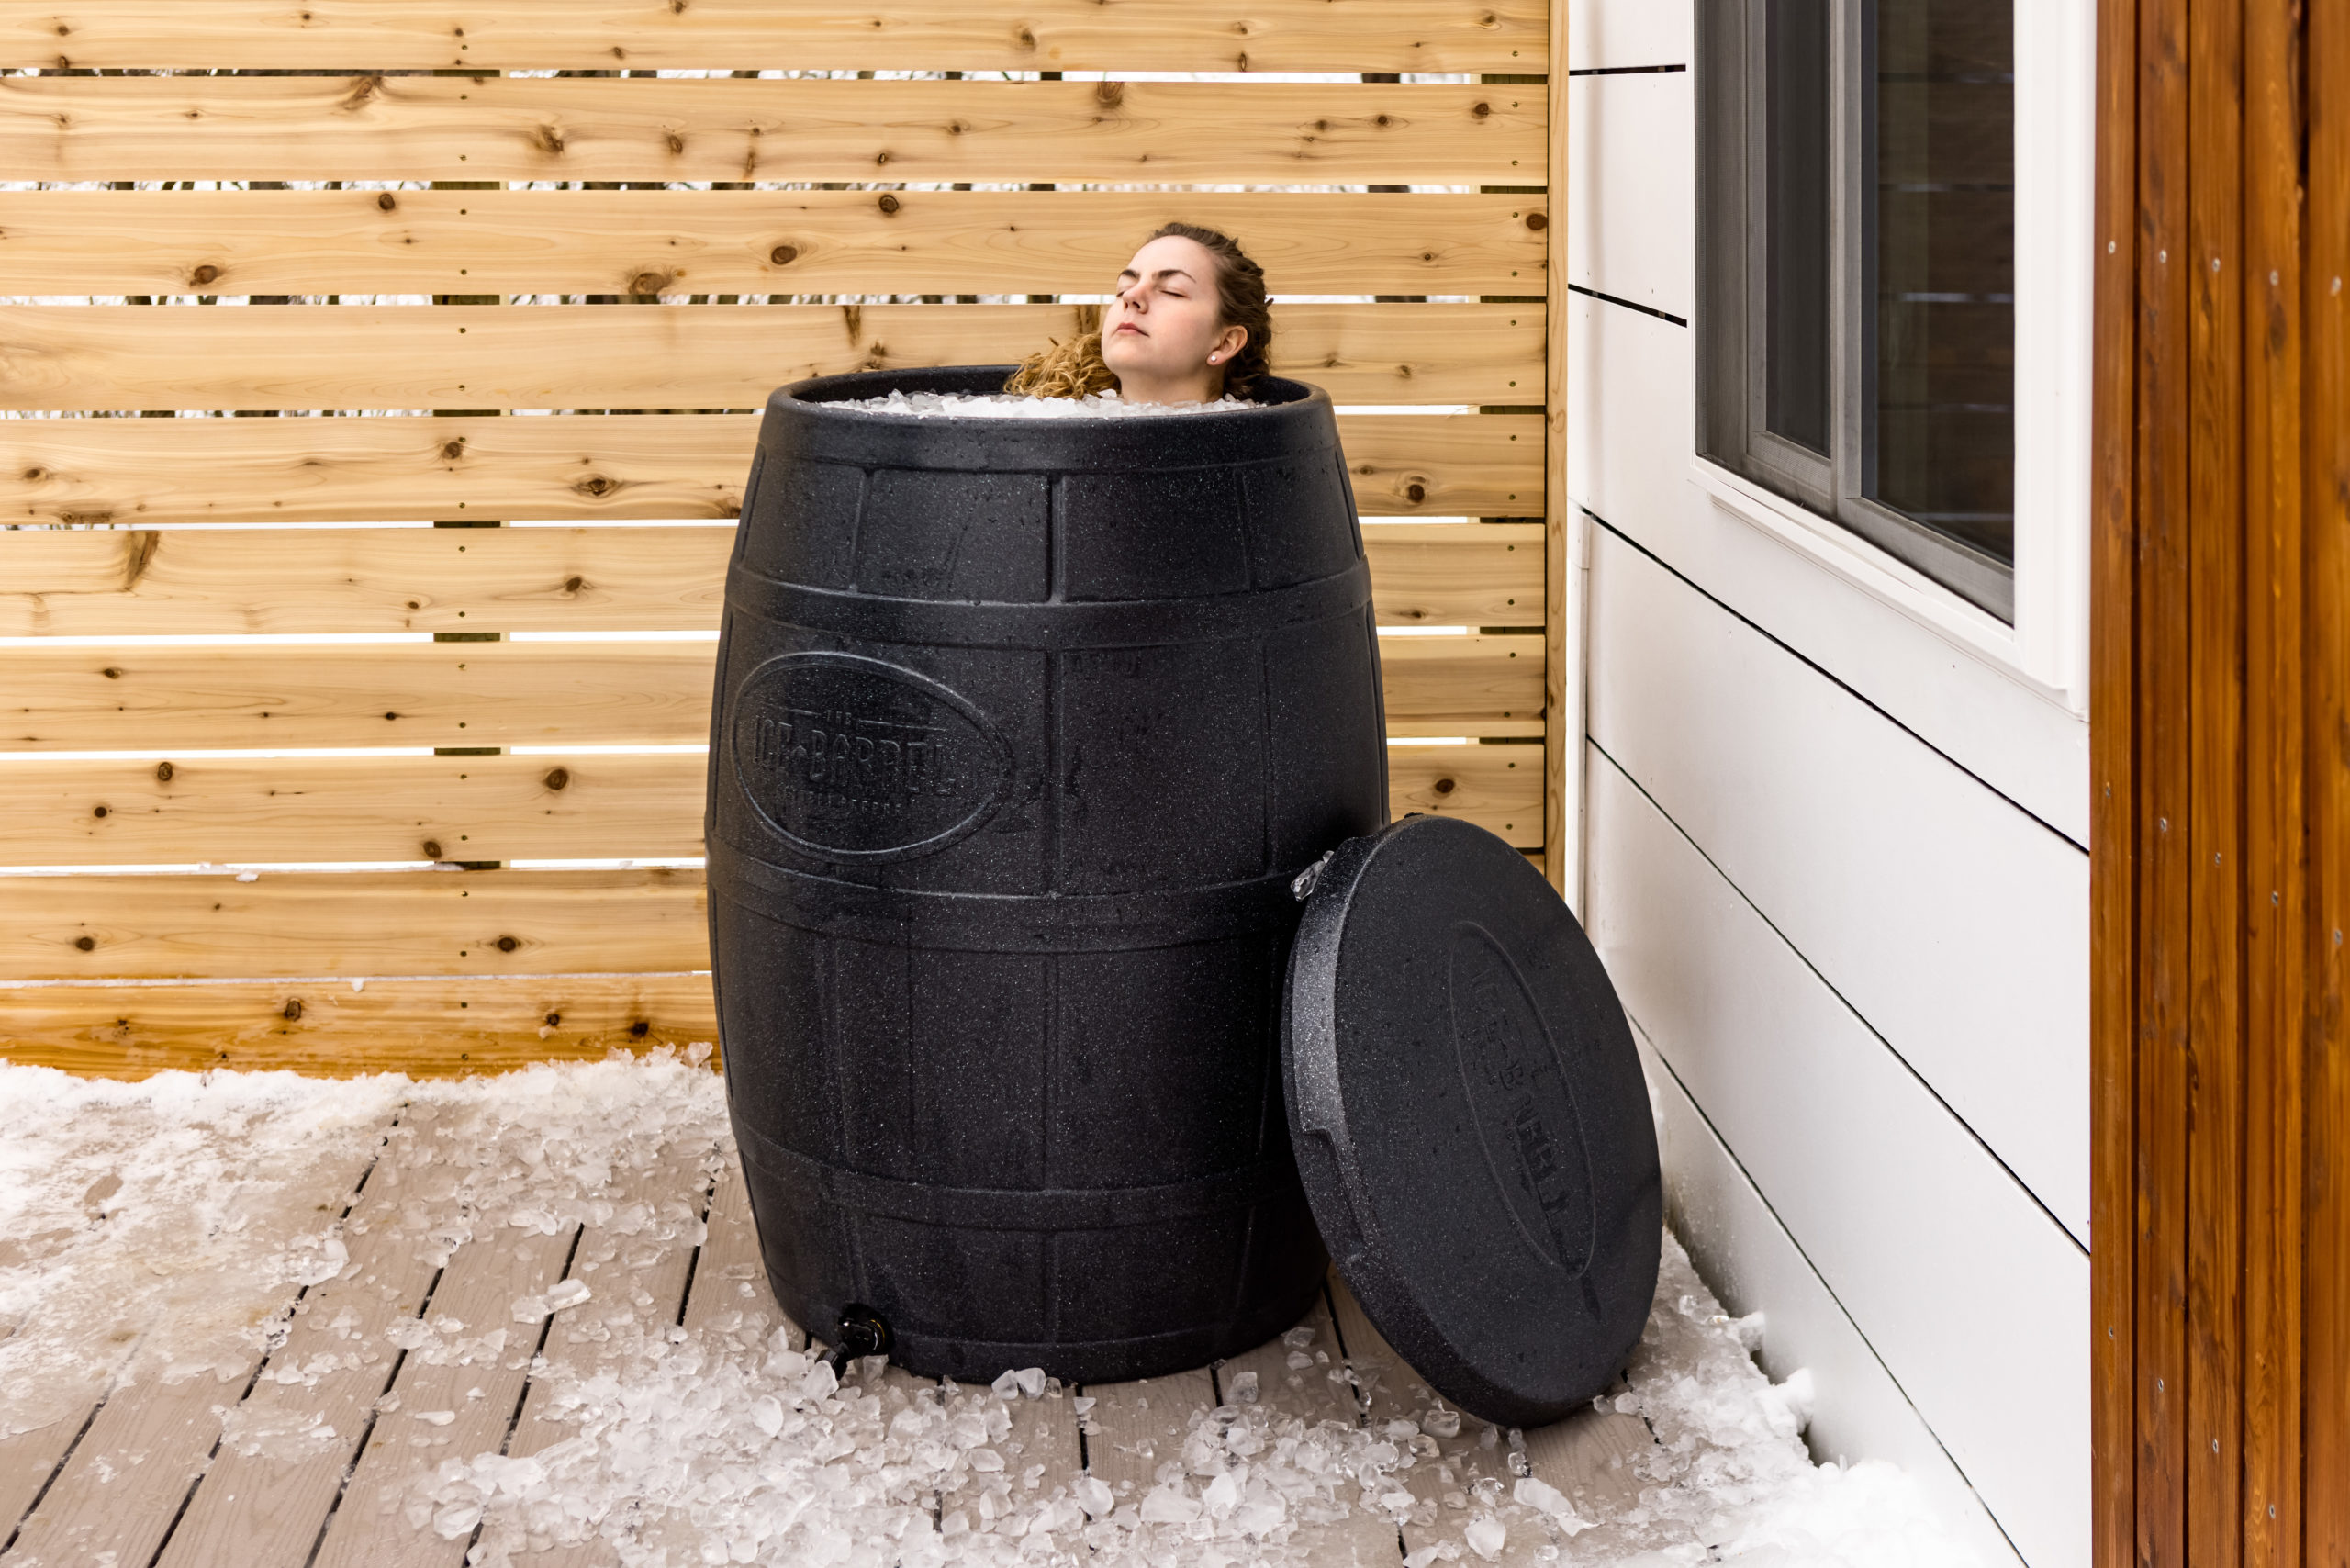 10 Health Benefits of Cold Plunges and Cold Therapy